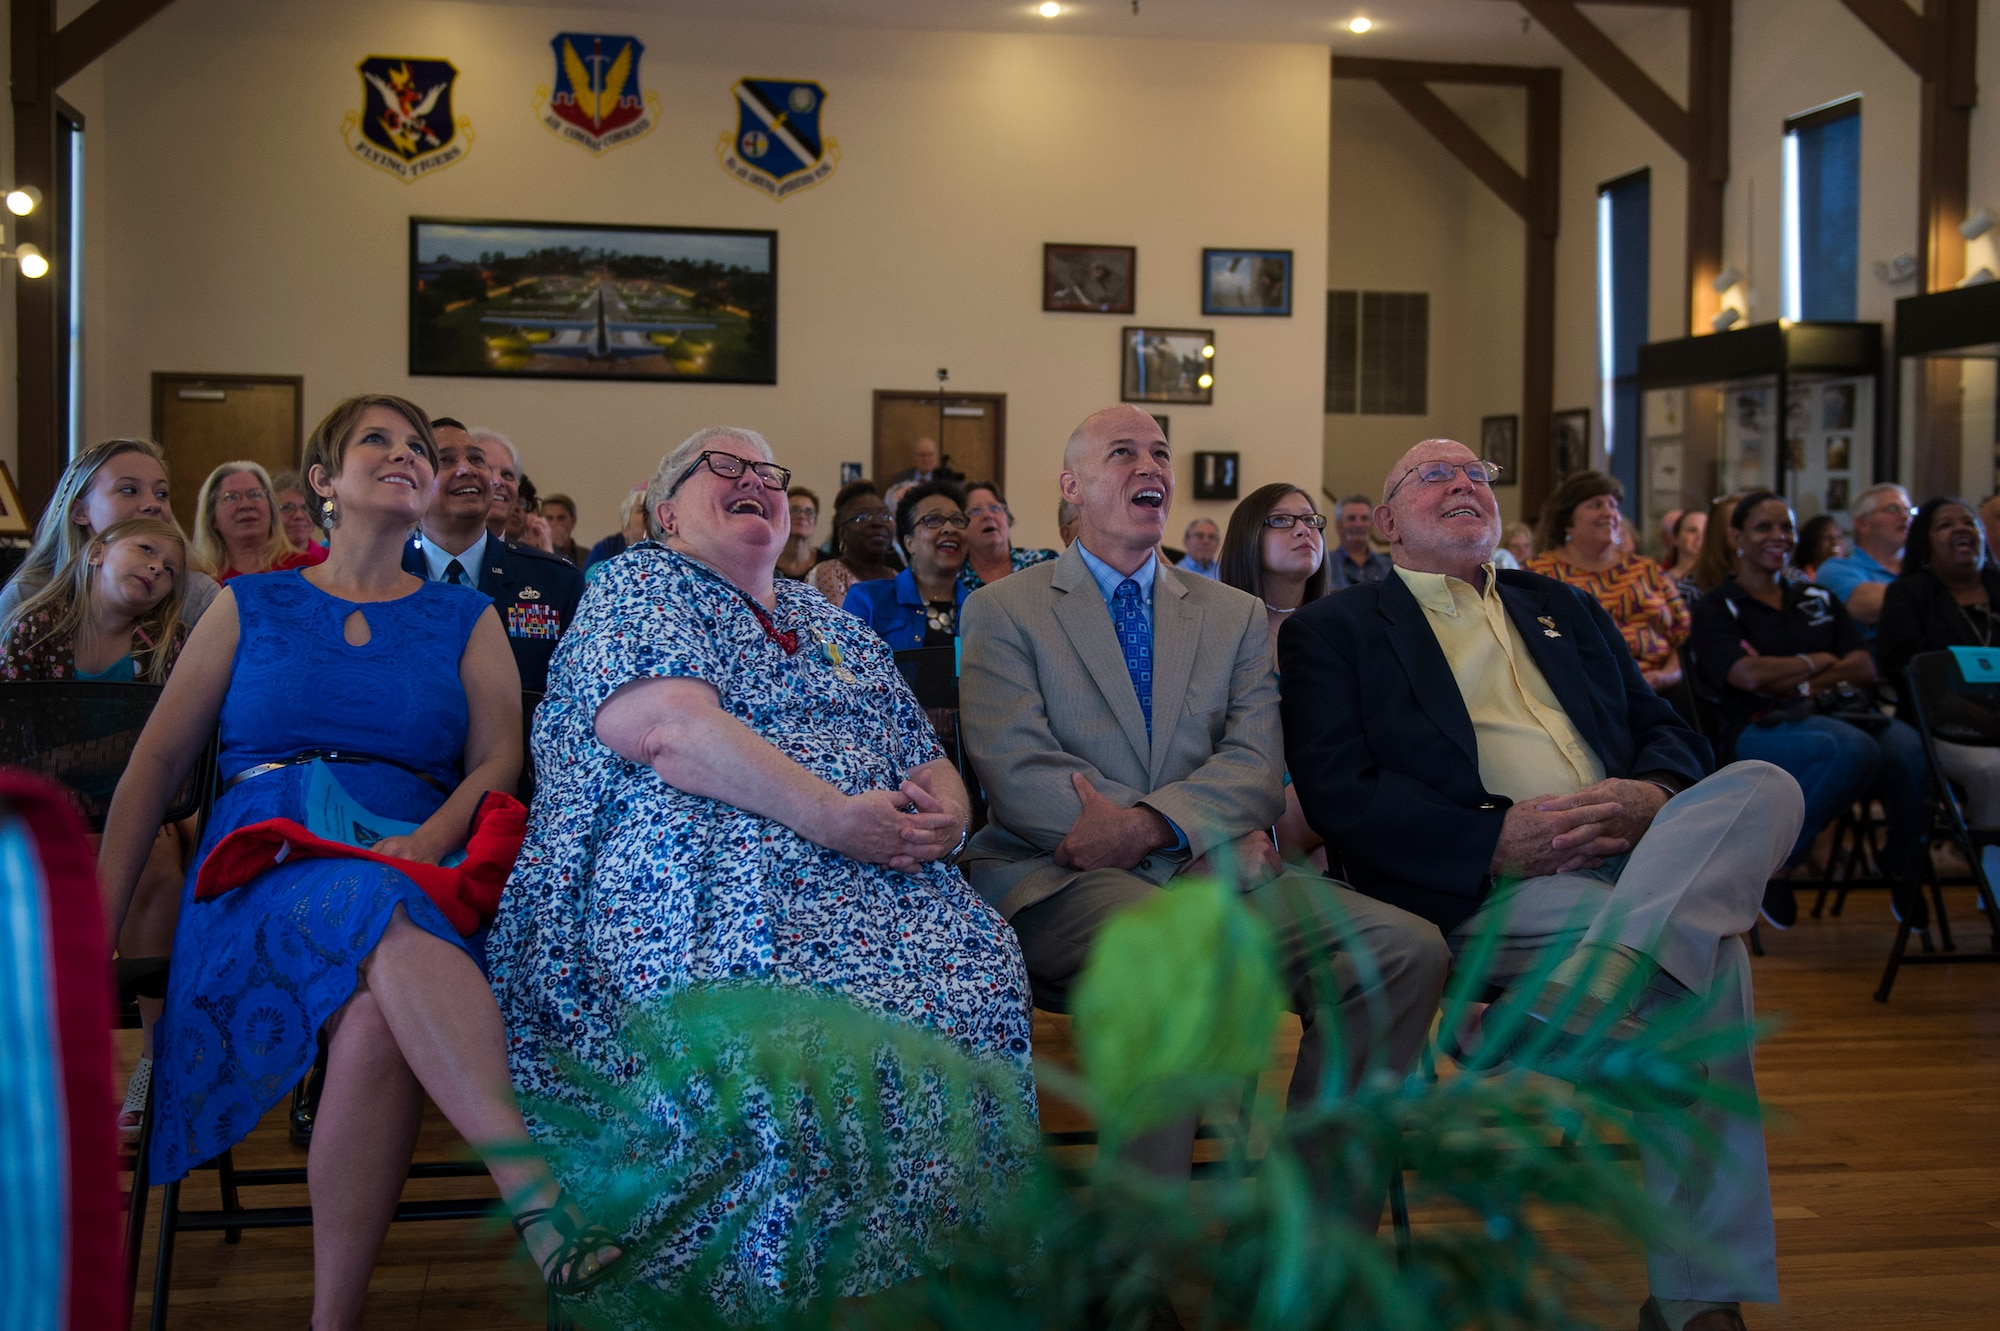 Ann Lukens, 23d Force Support Squadron school liaison officer, and her family shares a laugh during a tribute video at her retirement ceremony, Sept. 30, 2016, at Moody Air Force Base, Ga. Lukens says she will continue to enjoy exploring historical locations as well as spending time with her husband, son, daughter-in-law and four grandchildren. (U.S. Air Force photo by Airman 1st Class Greg Nash)